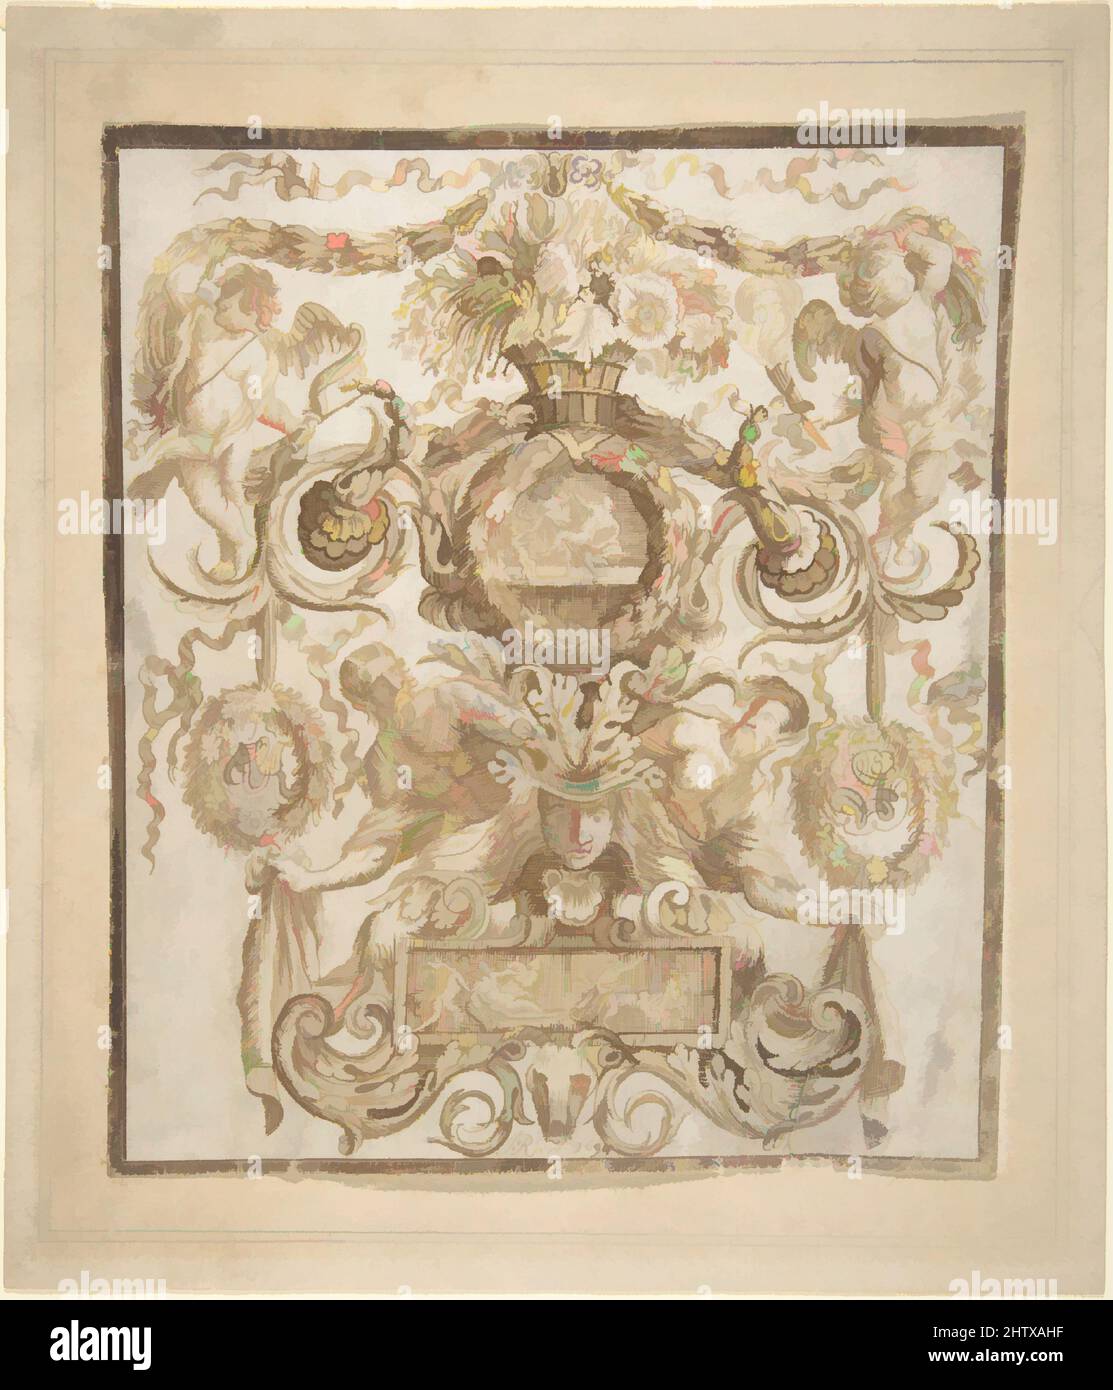 Art inspired by Ornamental Design, ca. 1694, Pen and brown ink. Border in brush and brown wash., 7 1/16 x 6 in. (17.9 x 15.2 cm), Jacob Roer, Classic works modernized by Artotop with a splash of modernity. Shapes, color and value, eye-catching visual impact on art. Emotions through freedom of artworks in a contemporary way. A timeless message pursuing a wildly creative new direction. Artists turning to the digital medium and creating the Artotop NFT Stock Photo